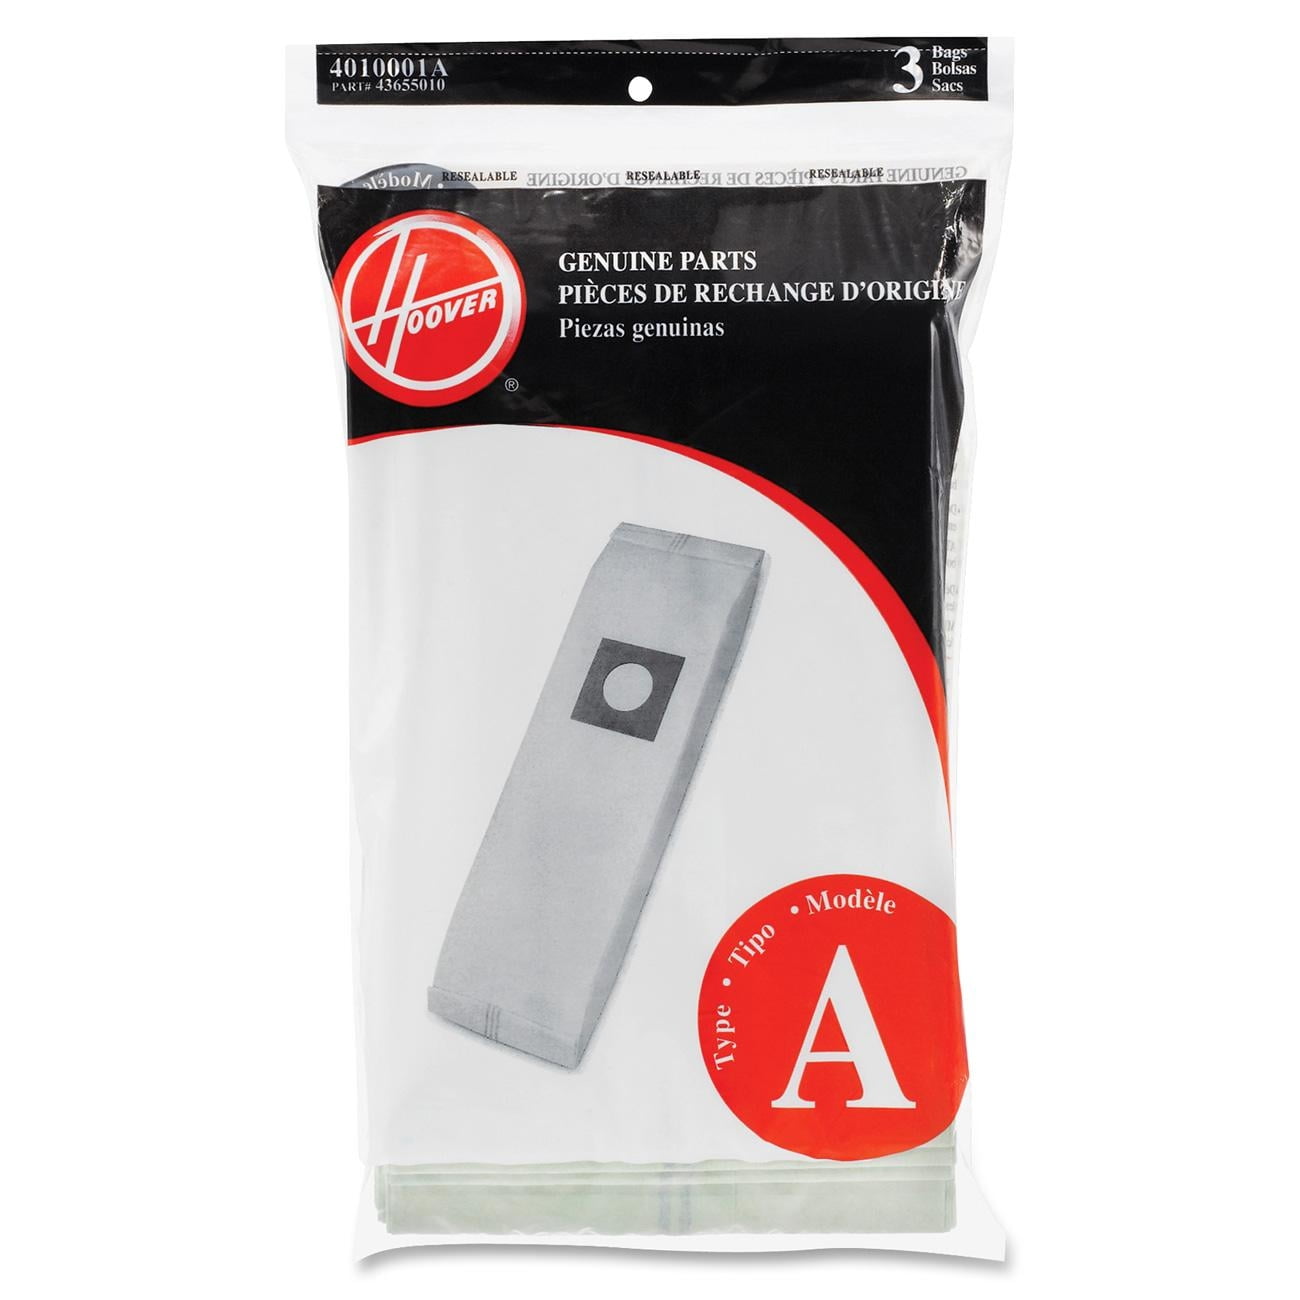 Share 71+ hoover type a vacuum bags best - in.duhocakina